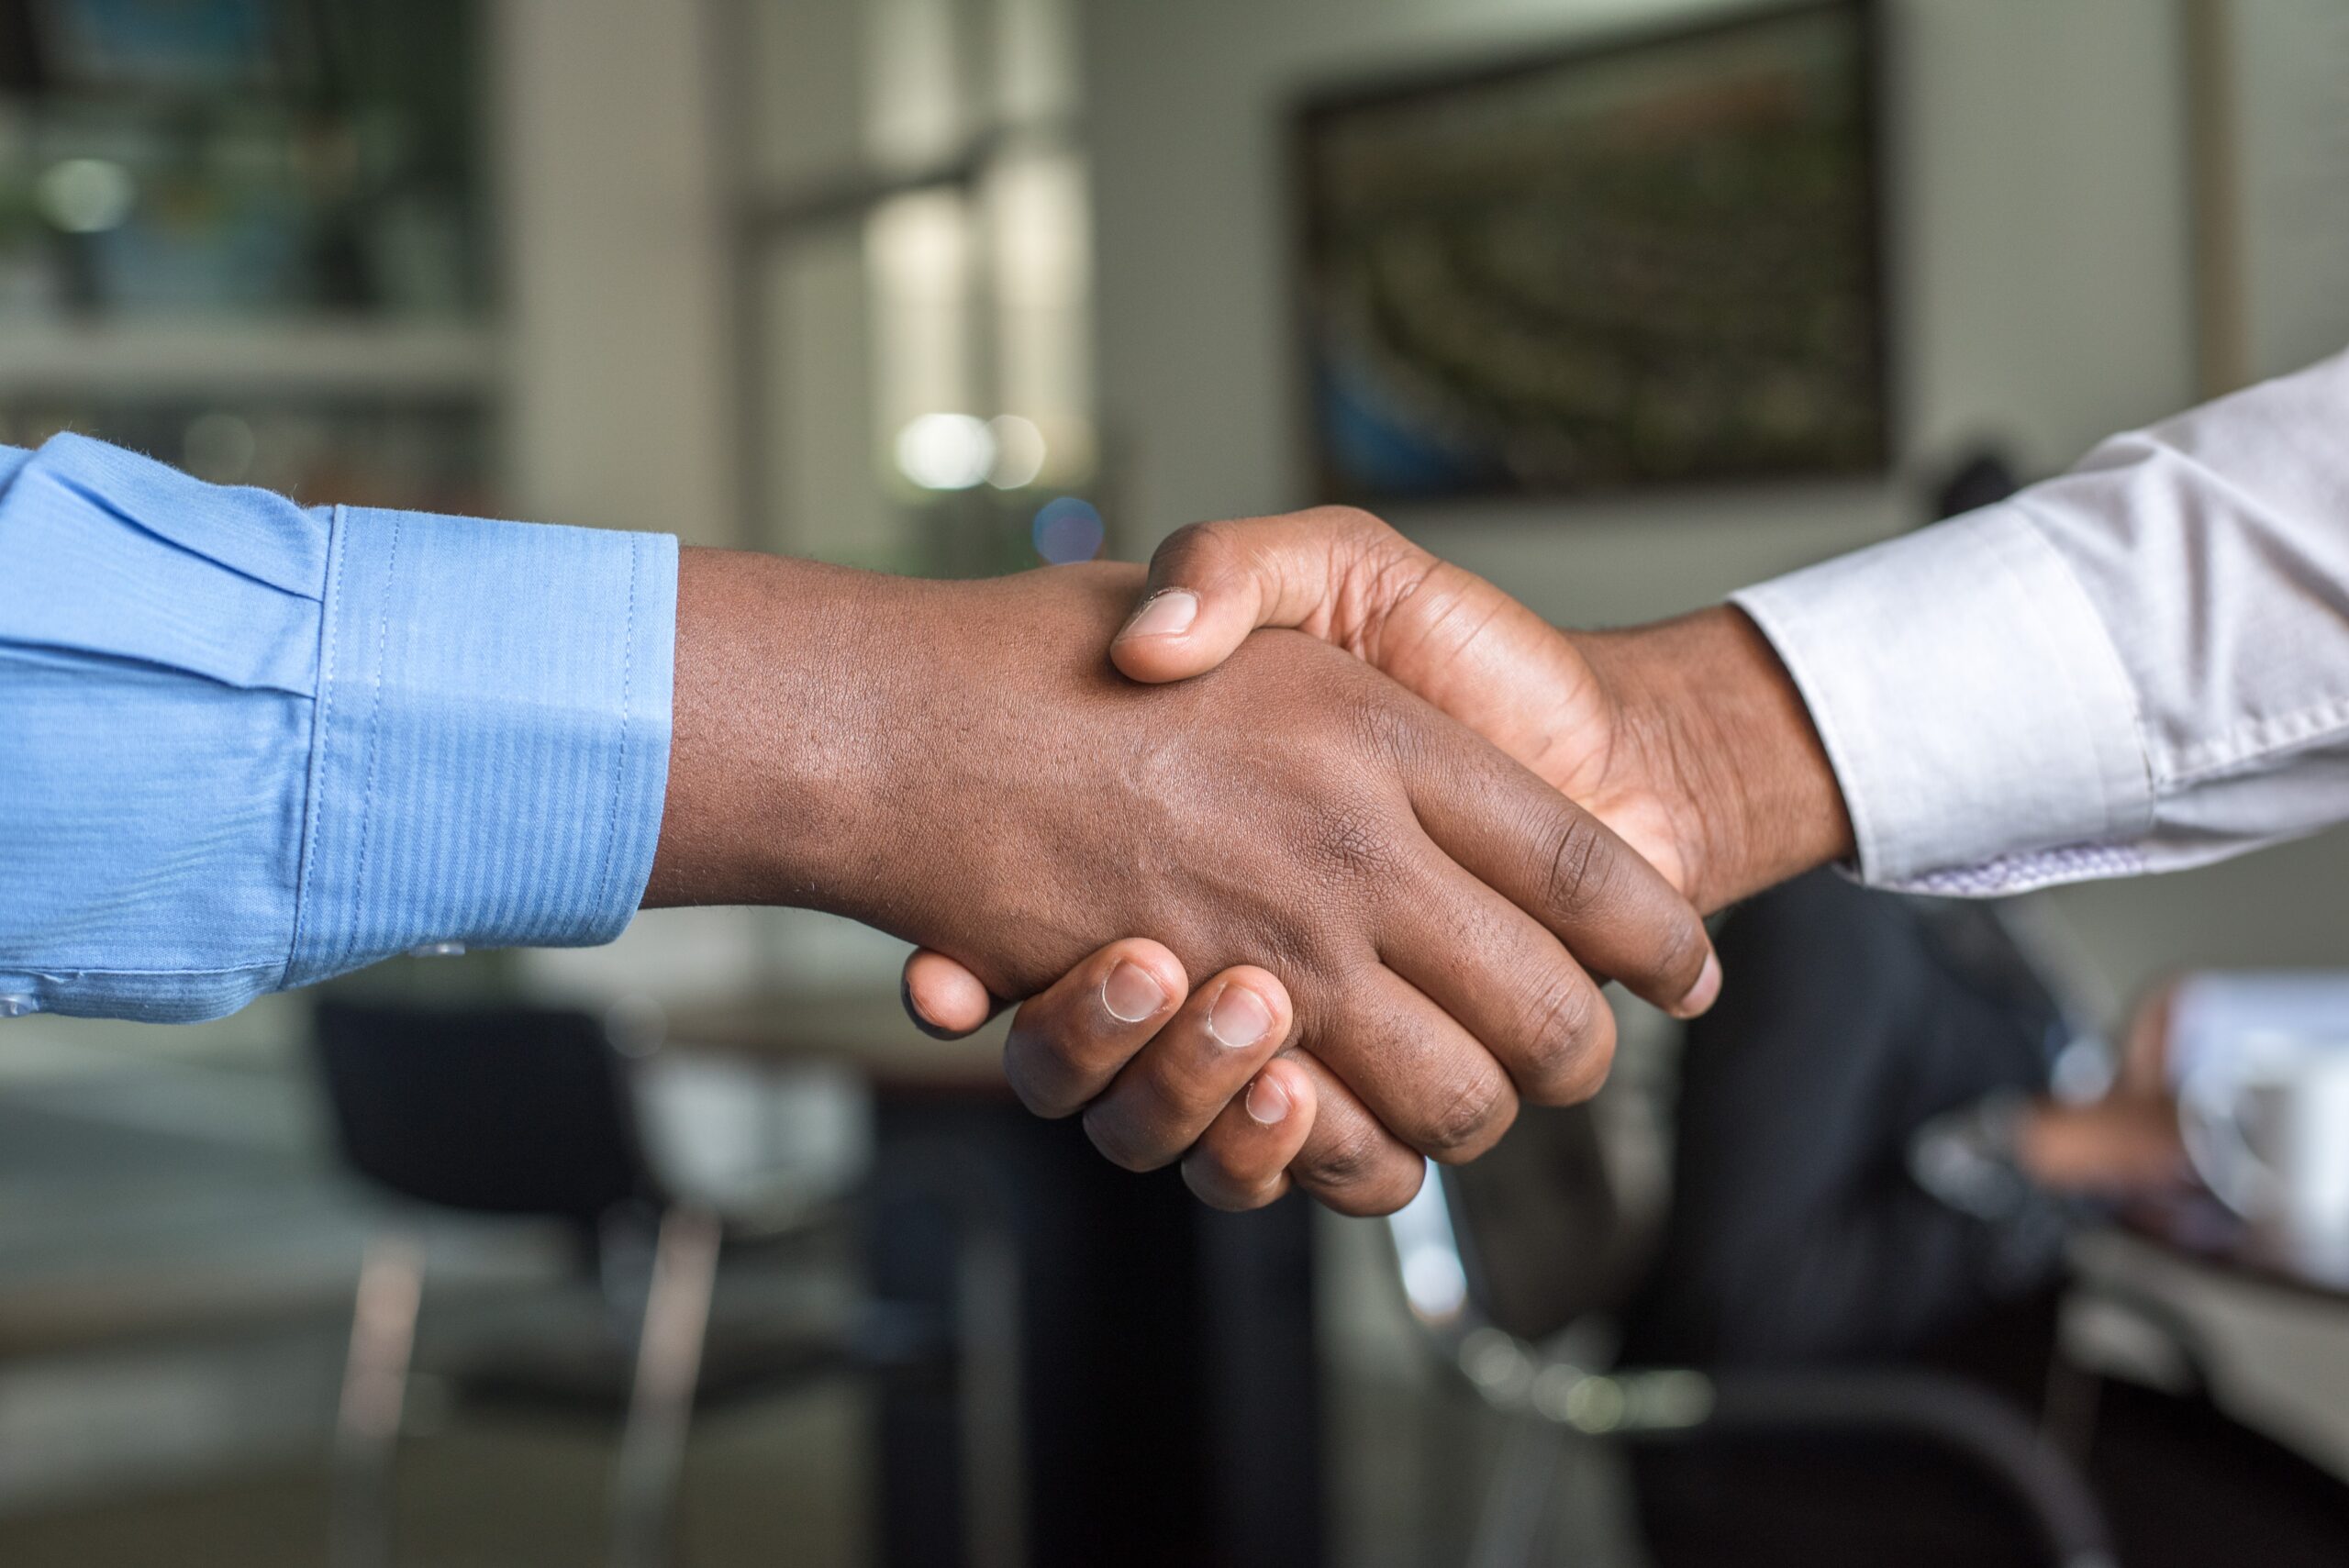 Two people shaking hands in business attire. The image is just of the hands